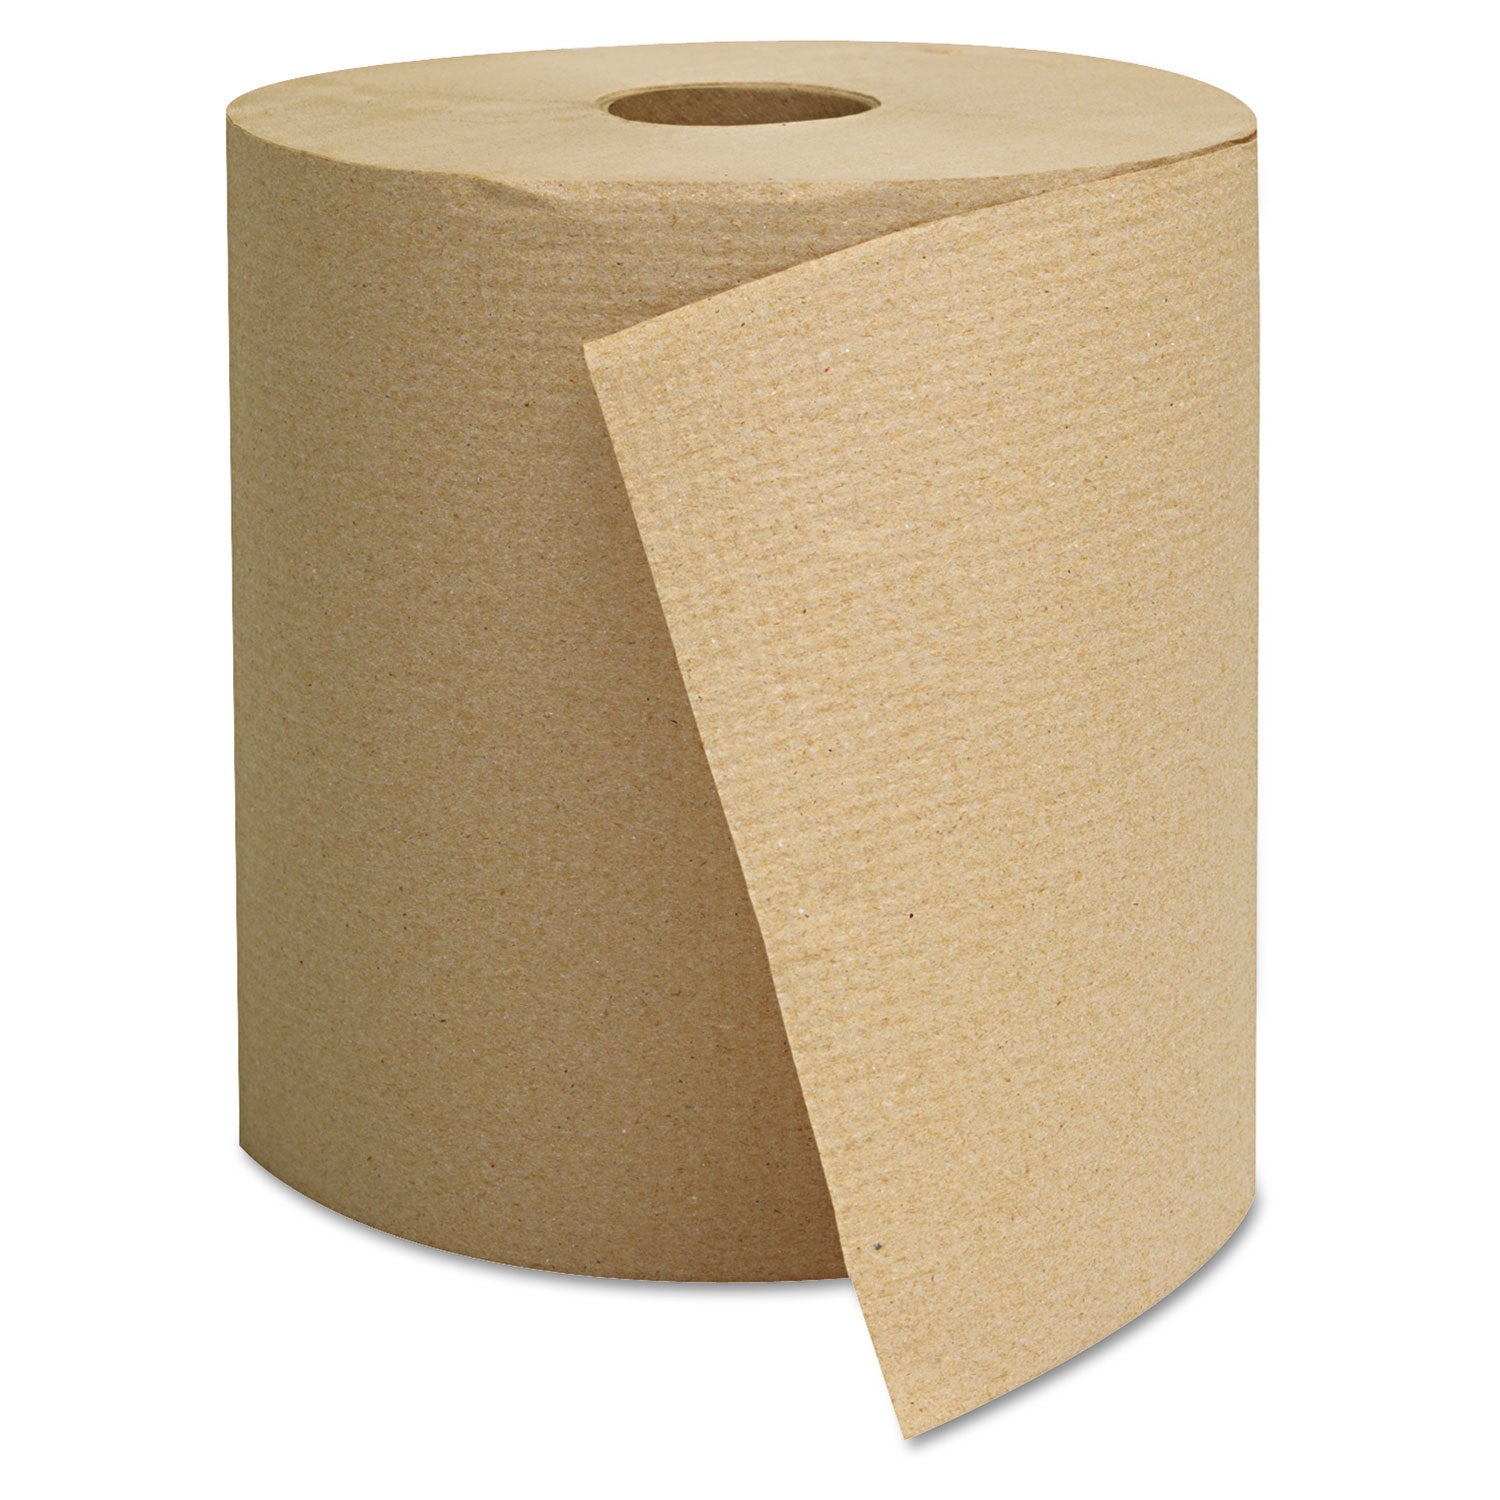 Hardwound Towels, 1-Ply, 800 ft, Brown, 6 Rolls/Carton - 